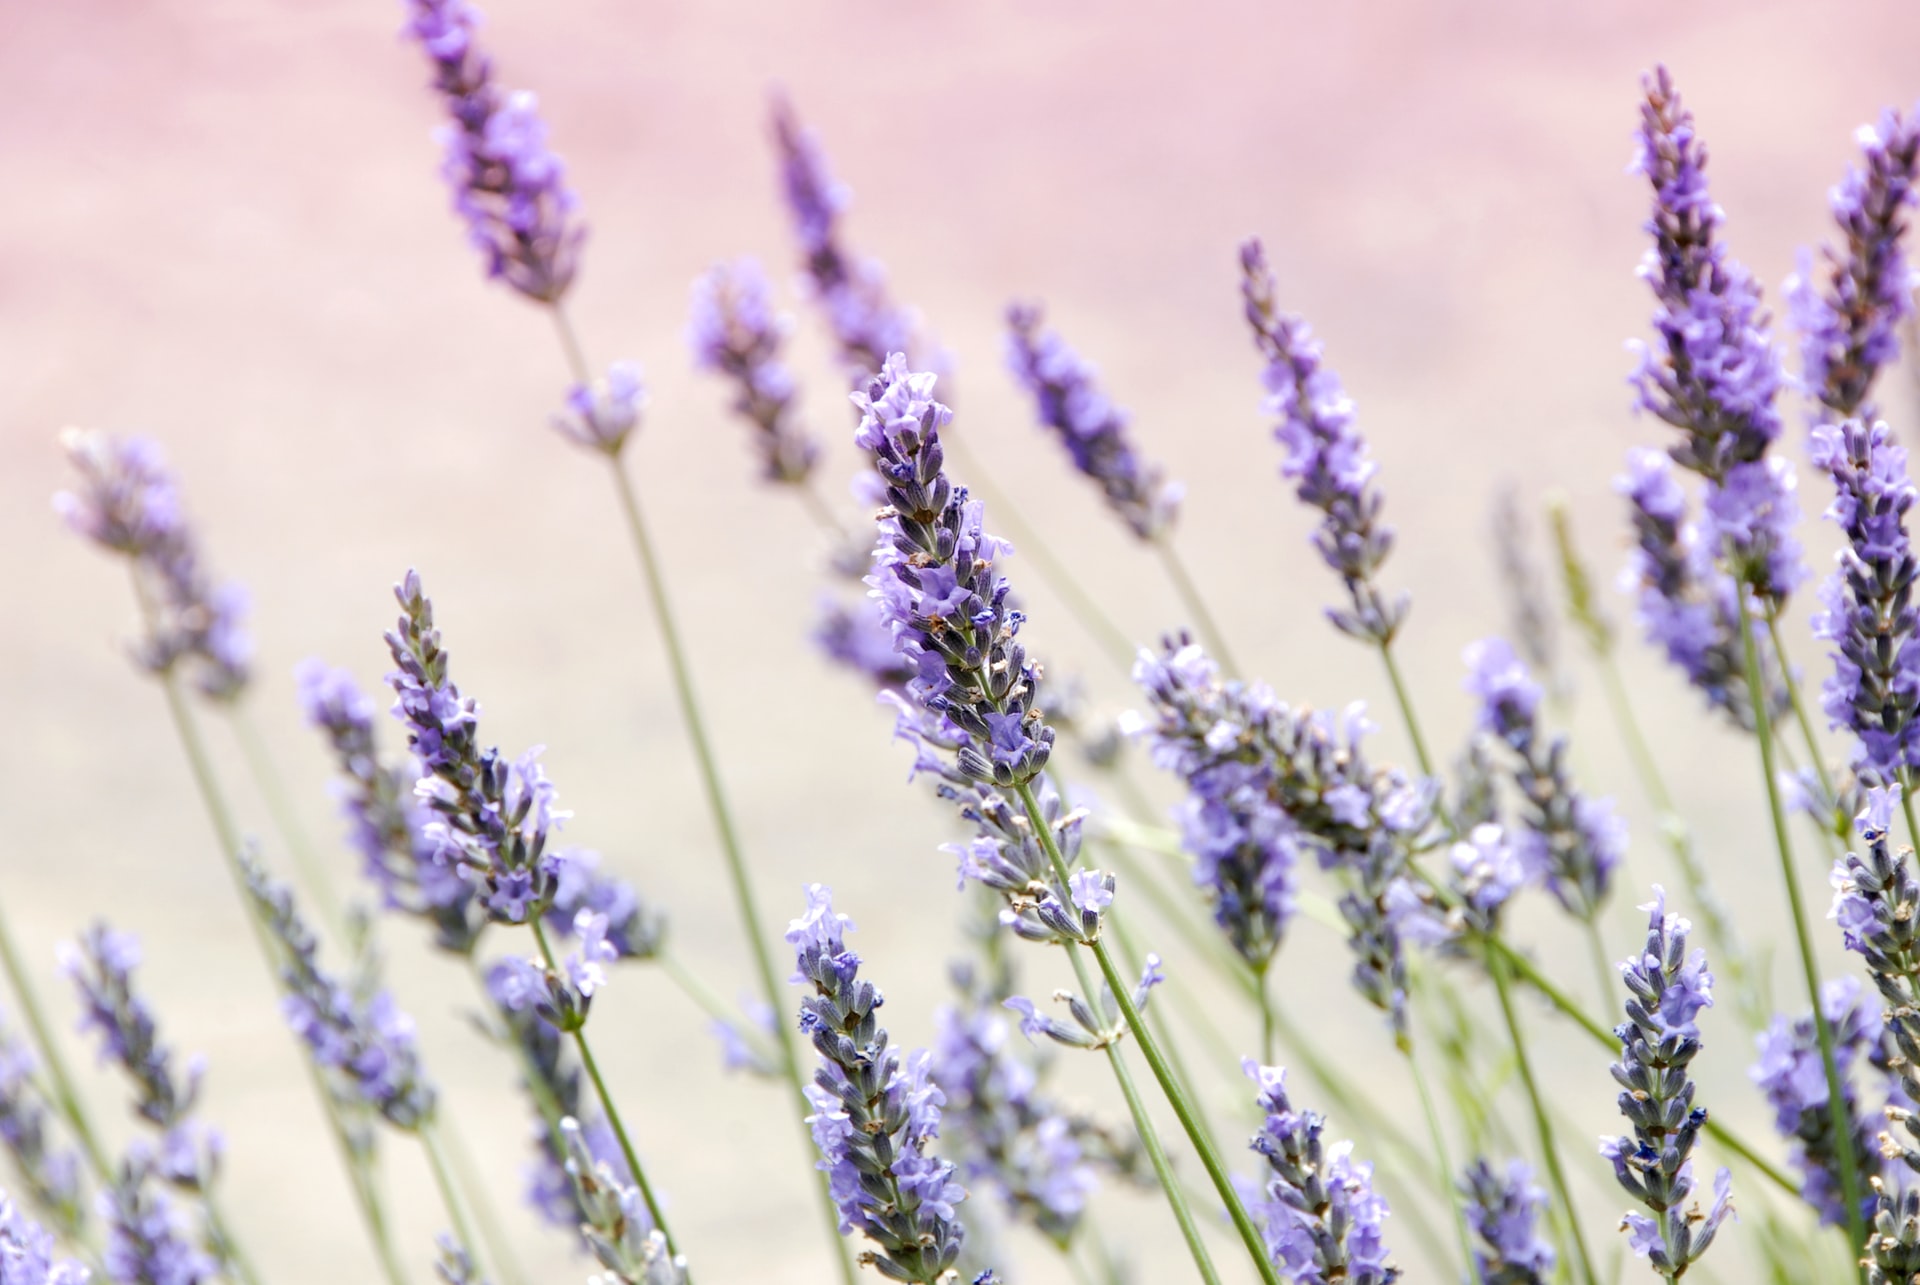  Growing lavender from cuttings: Everything you need to know